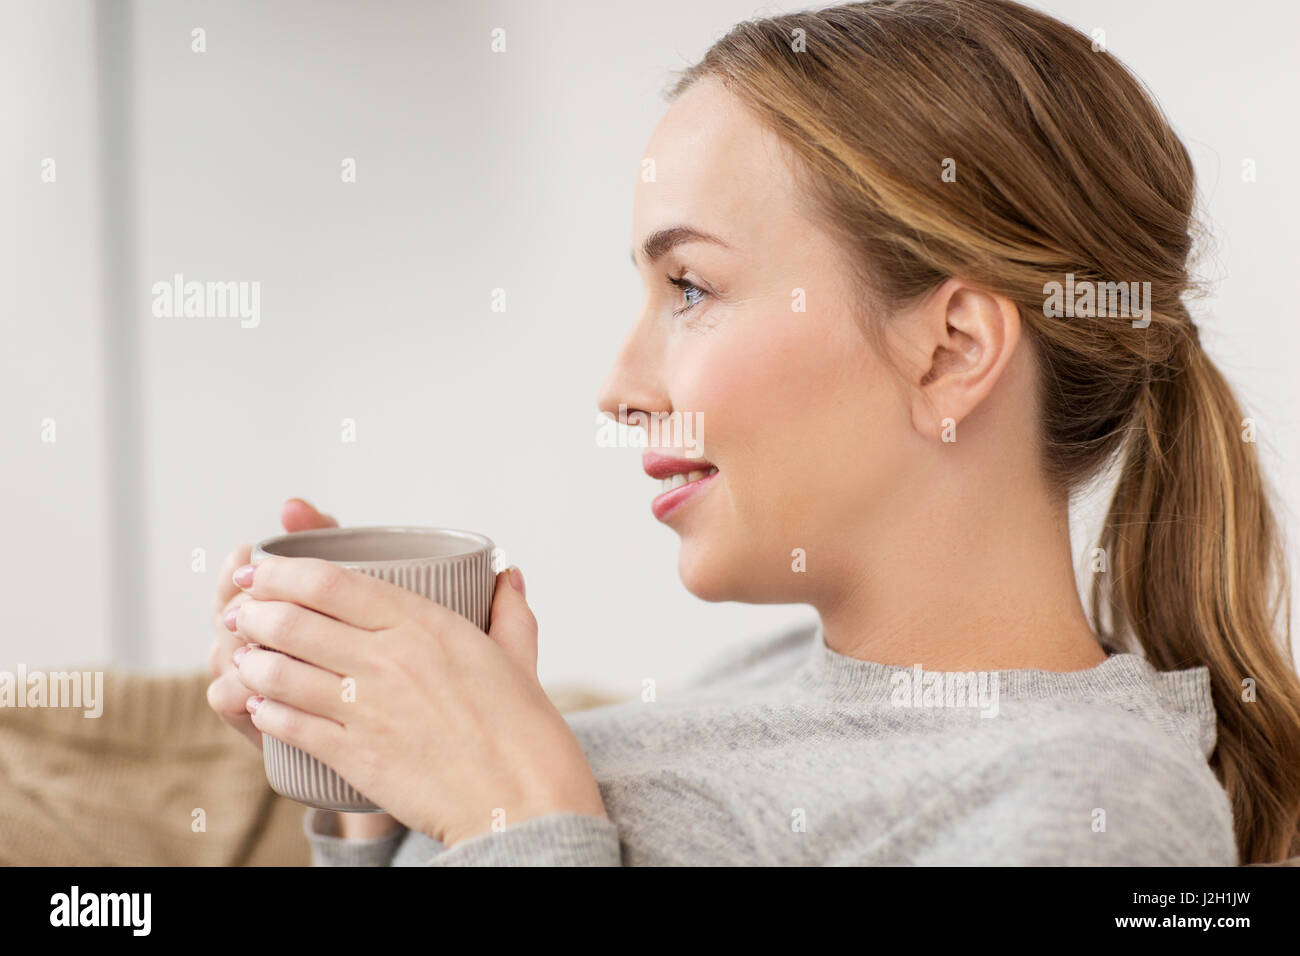 happy woman with cup or mug drinking at home Stock Photo